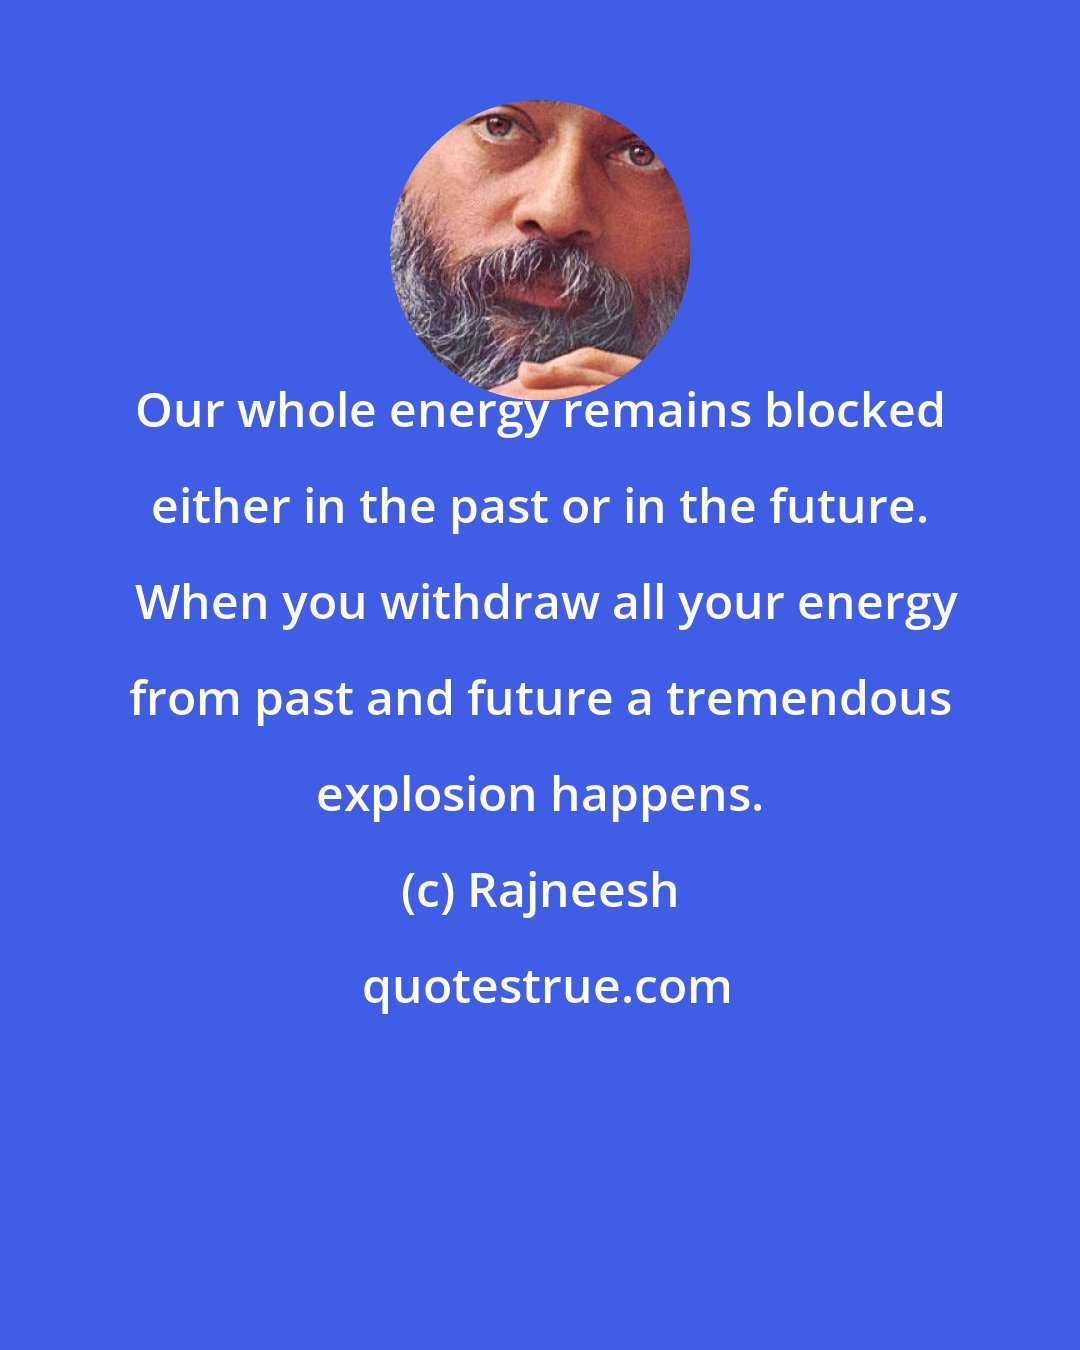 Rajneesh: Our whole energy remains blocked either in the past or in the future.  When you withdraw all your energy from past and future a tremendous explosion happens.